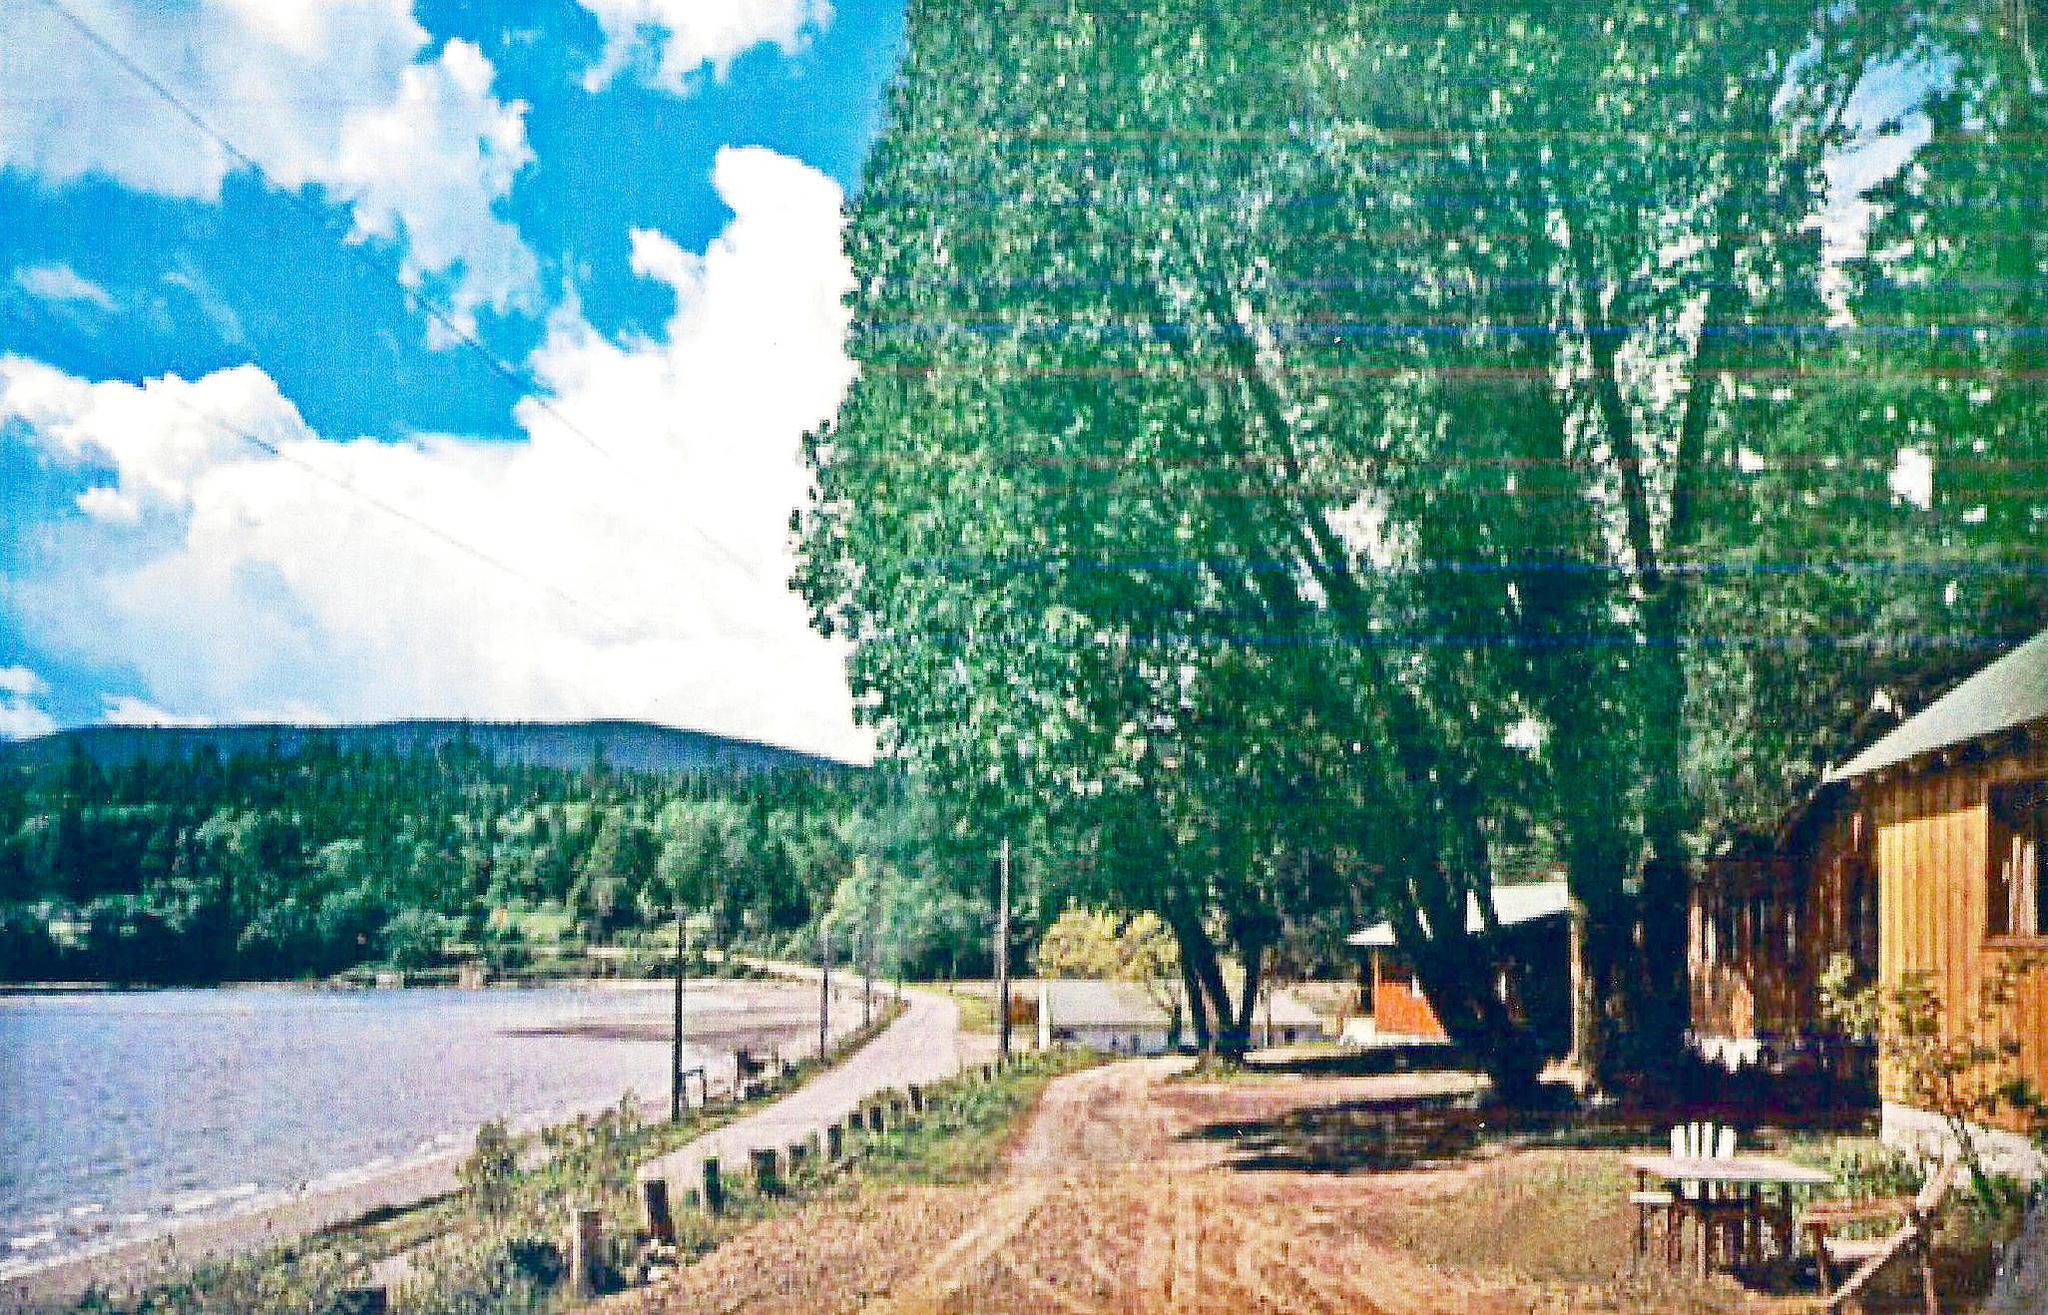 Rex Gerberding Collection                                The Silver Sands Resort, shown in the 1950s or early 1960s, is just east of John Wayne Marina.